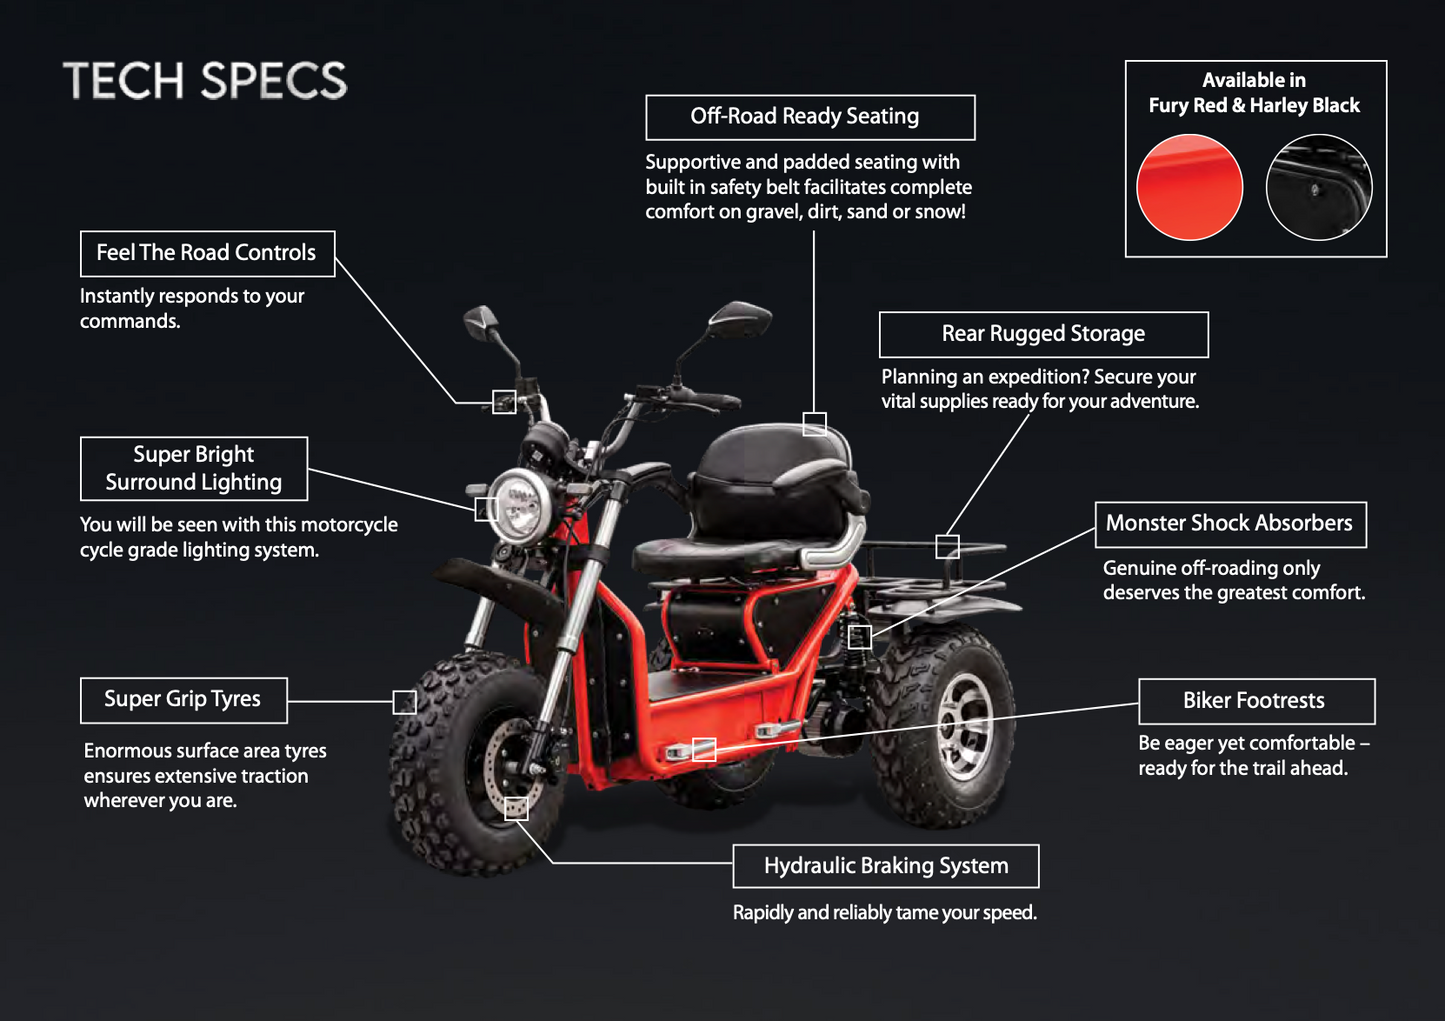 Scooterpac Invader: The Ultimate Off-Road Mobility Scooter